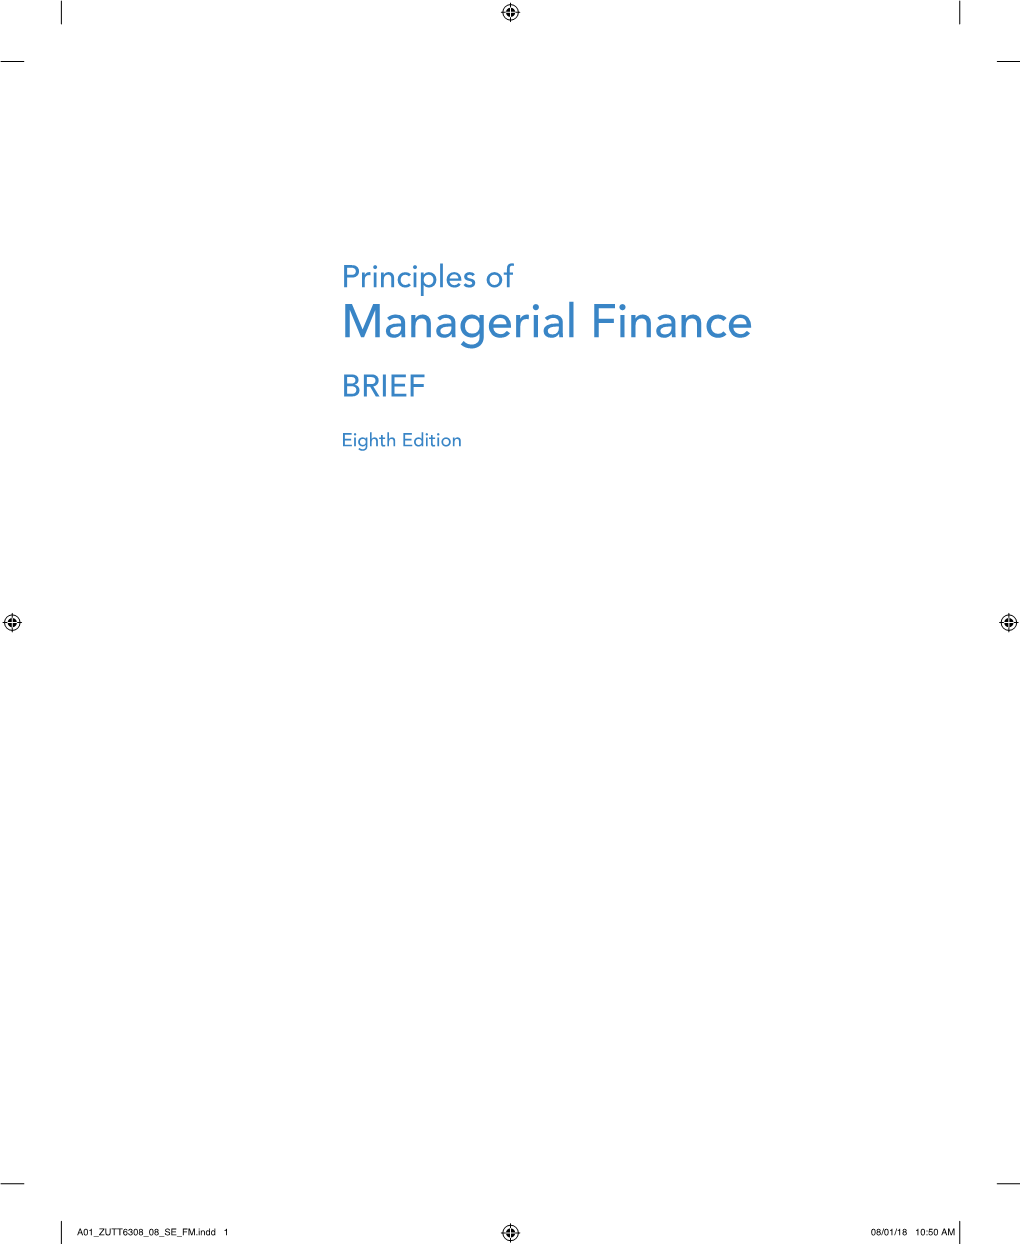 Managerial Finance BRIEF